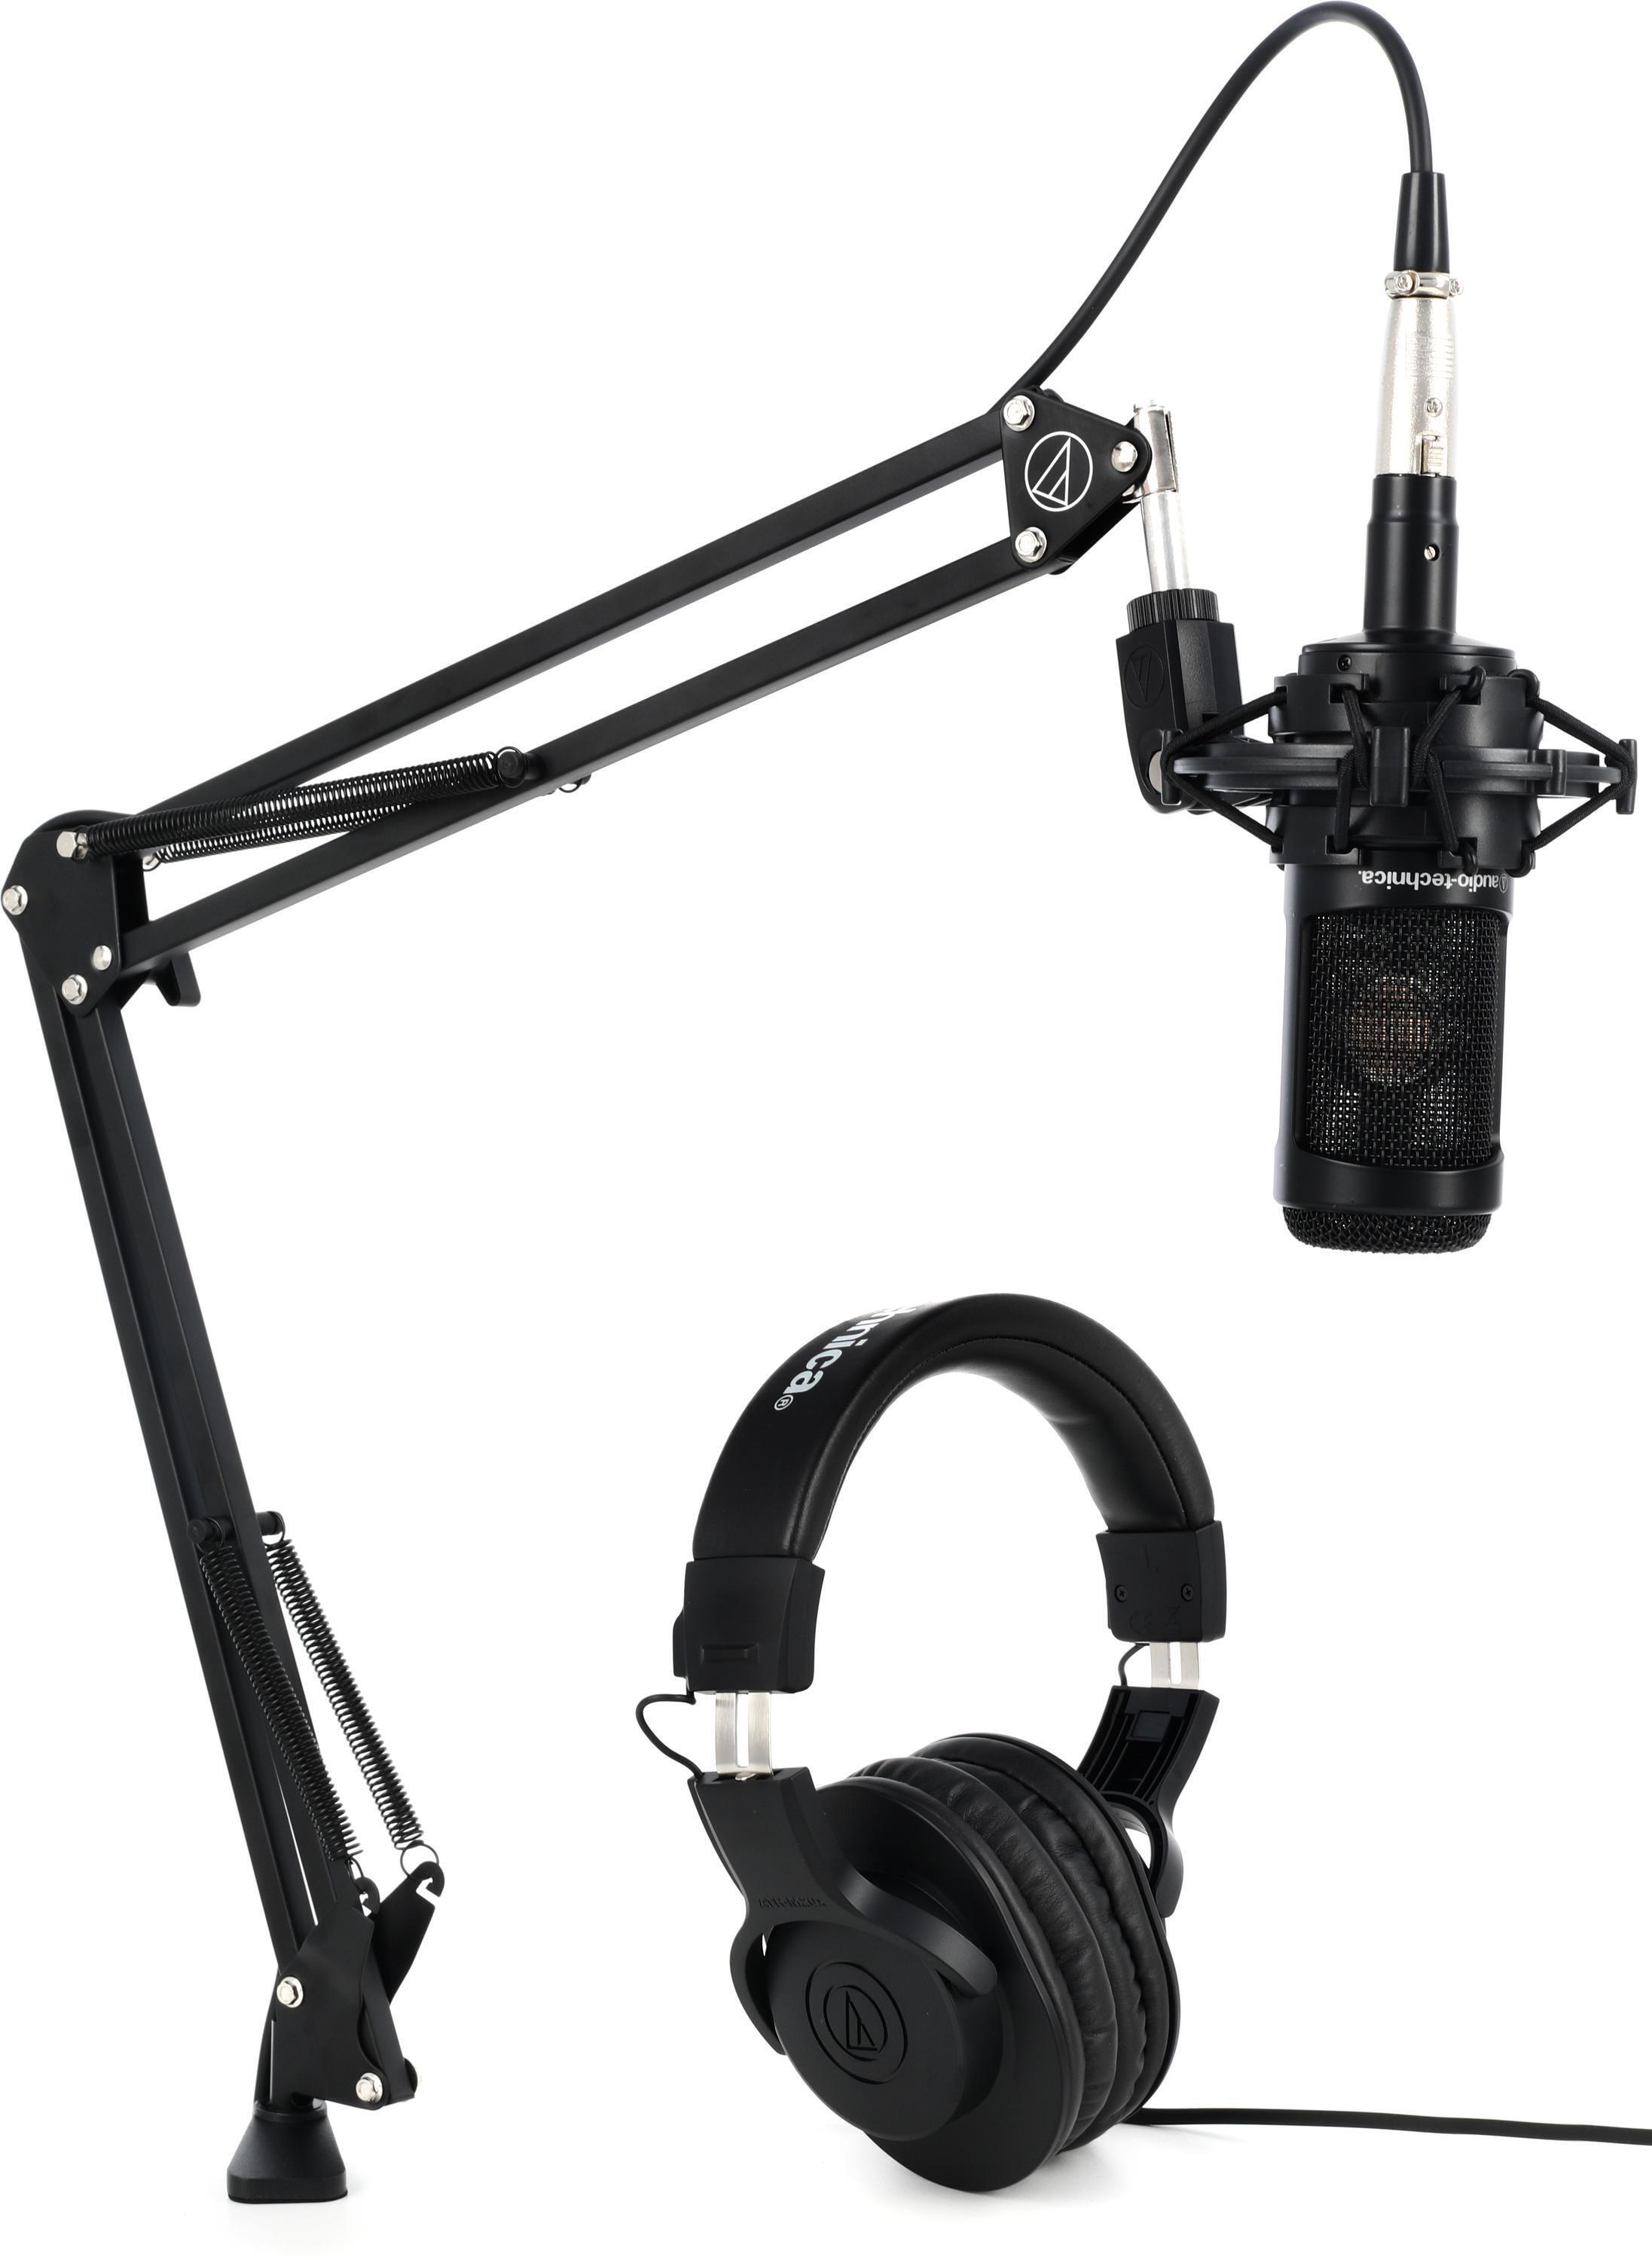 Audio-Technica AT2020USB Streaming / Podcasting Pack